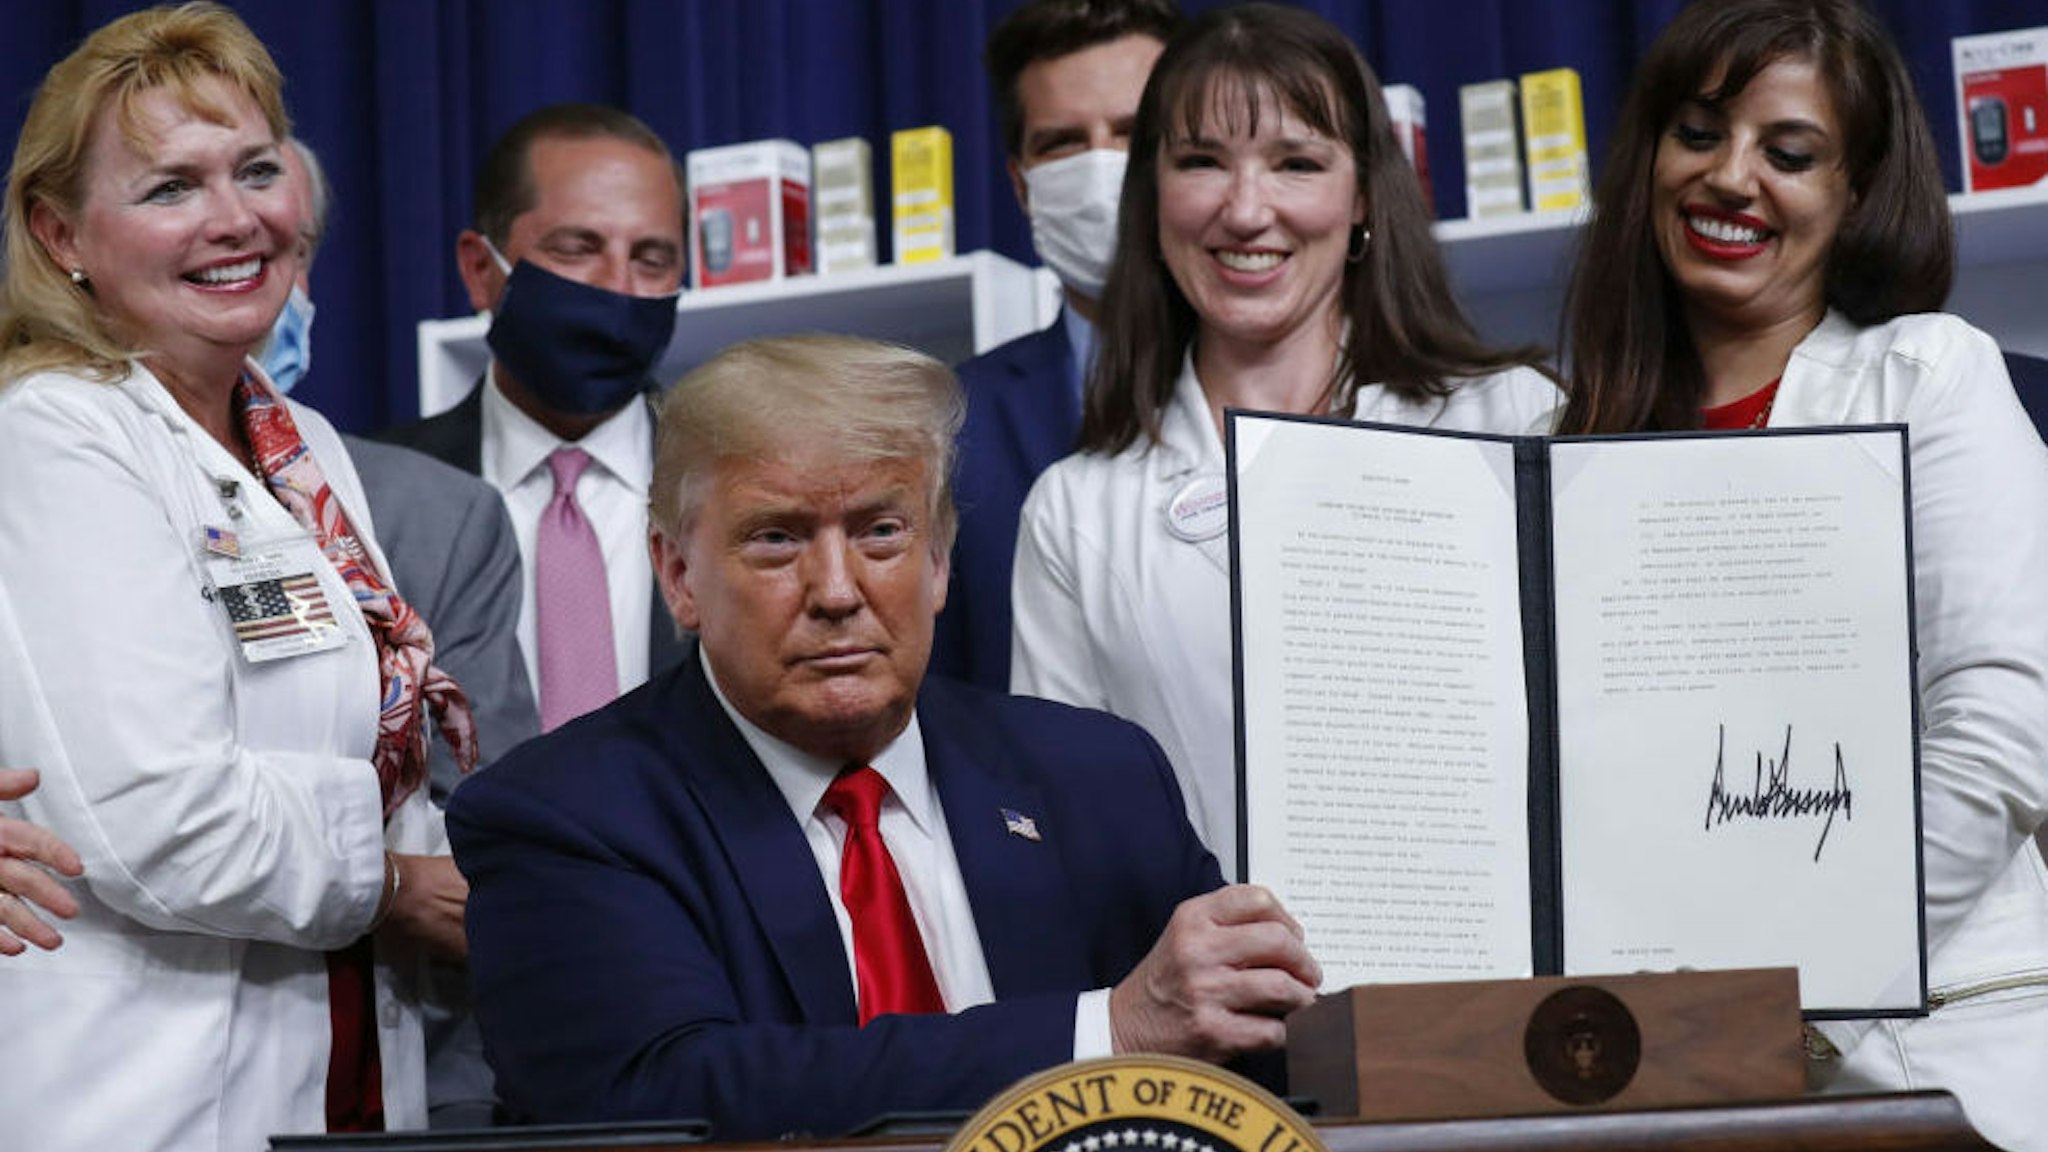 U.S. President Donald Trump holds an executive order on lowering drug prices after being signed during a ceremony in the Eisenhower Executive Office Building in Washington, D.C., U.S., on Friday, July 24, 2020.